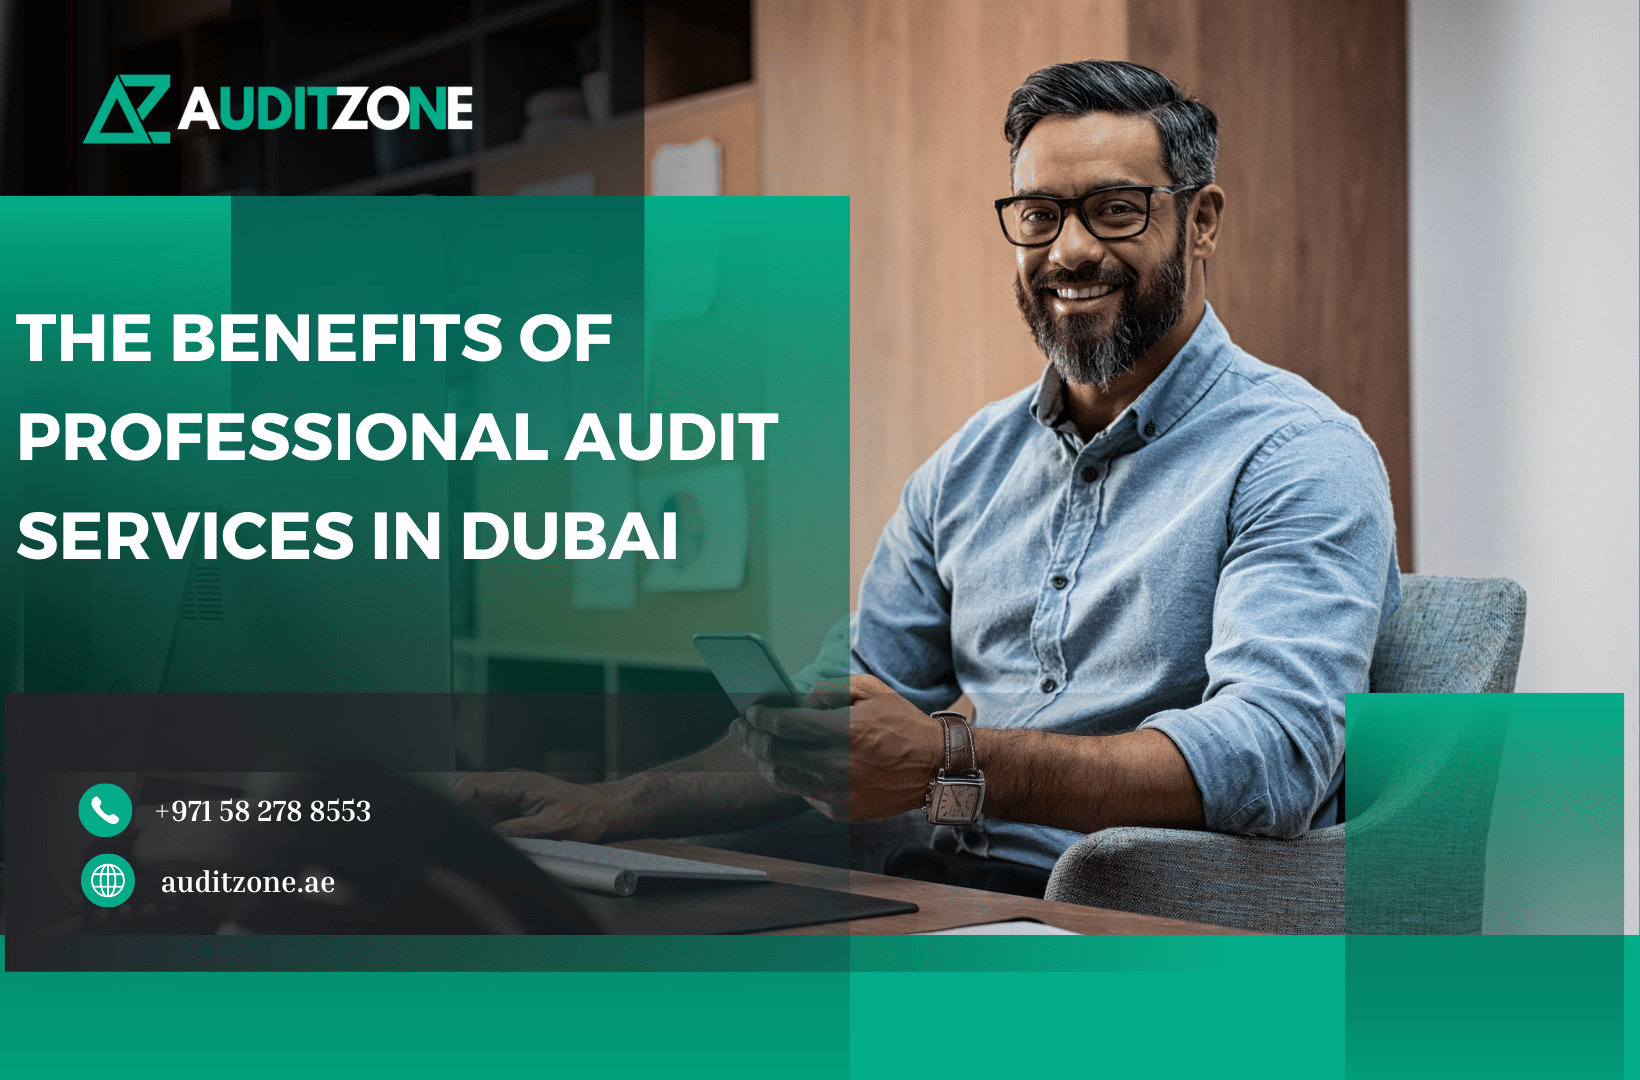 The Benefits of Professional Audit Services in Dubai